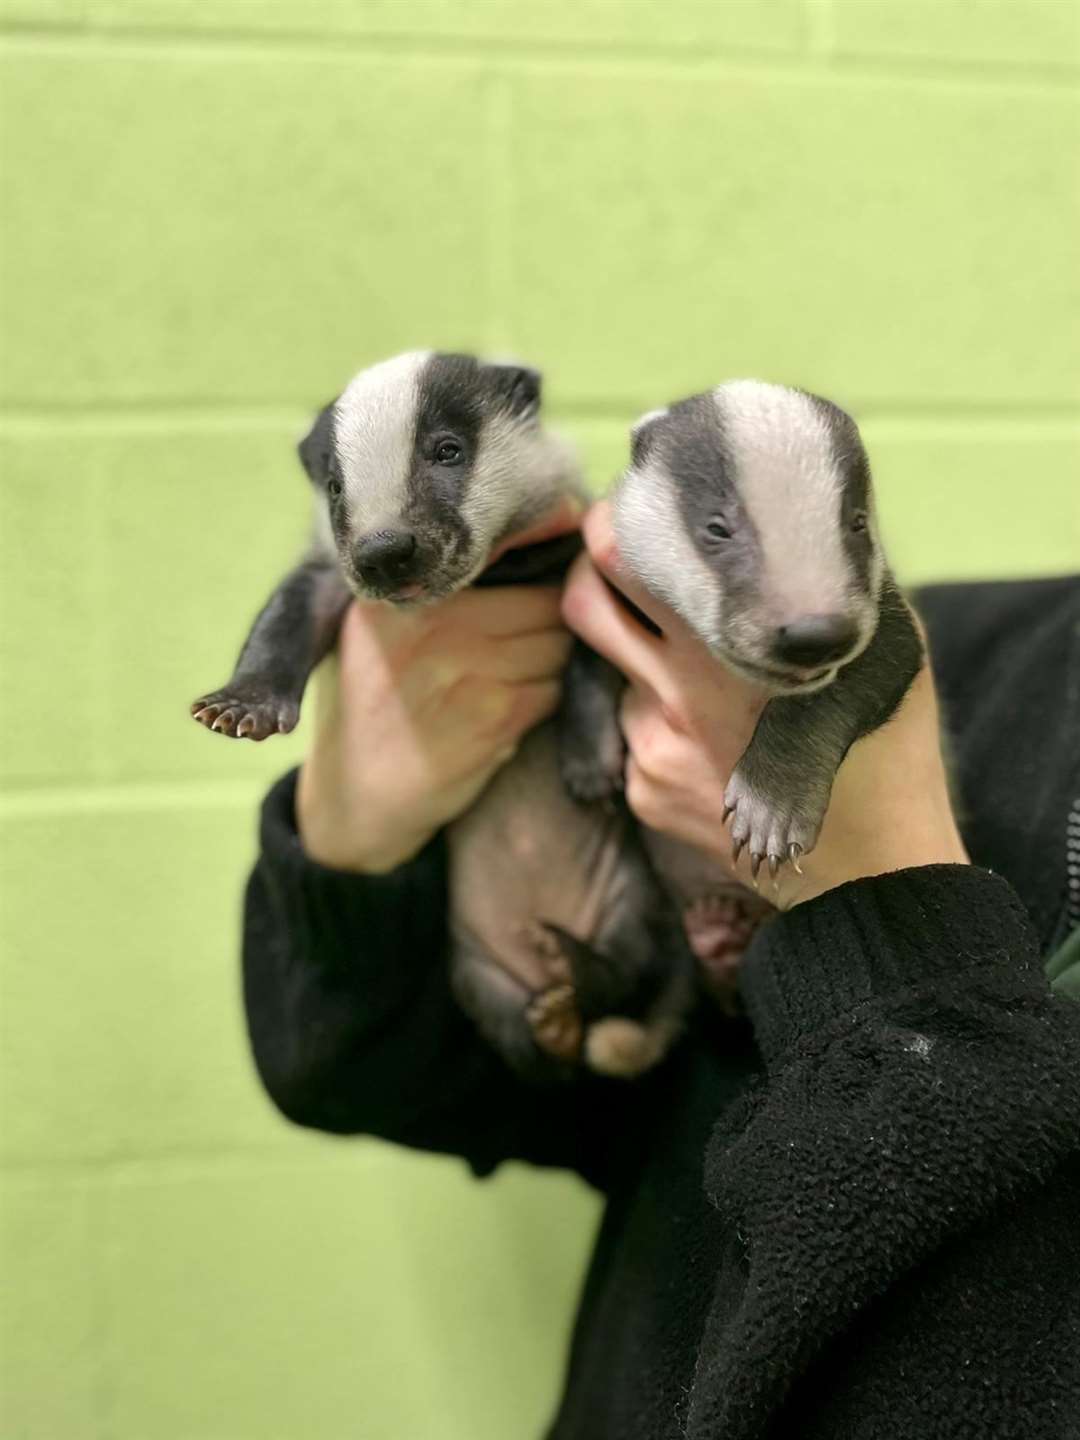 The Scottish SPCA is currently caring for five adorable badger cubs at its National Wildlife Rescue Centre including the smallest badger cub ever to be admitted.